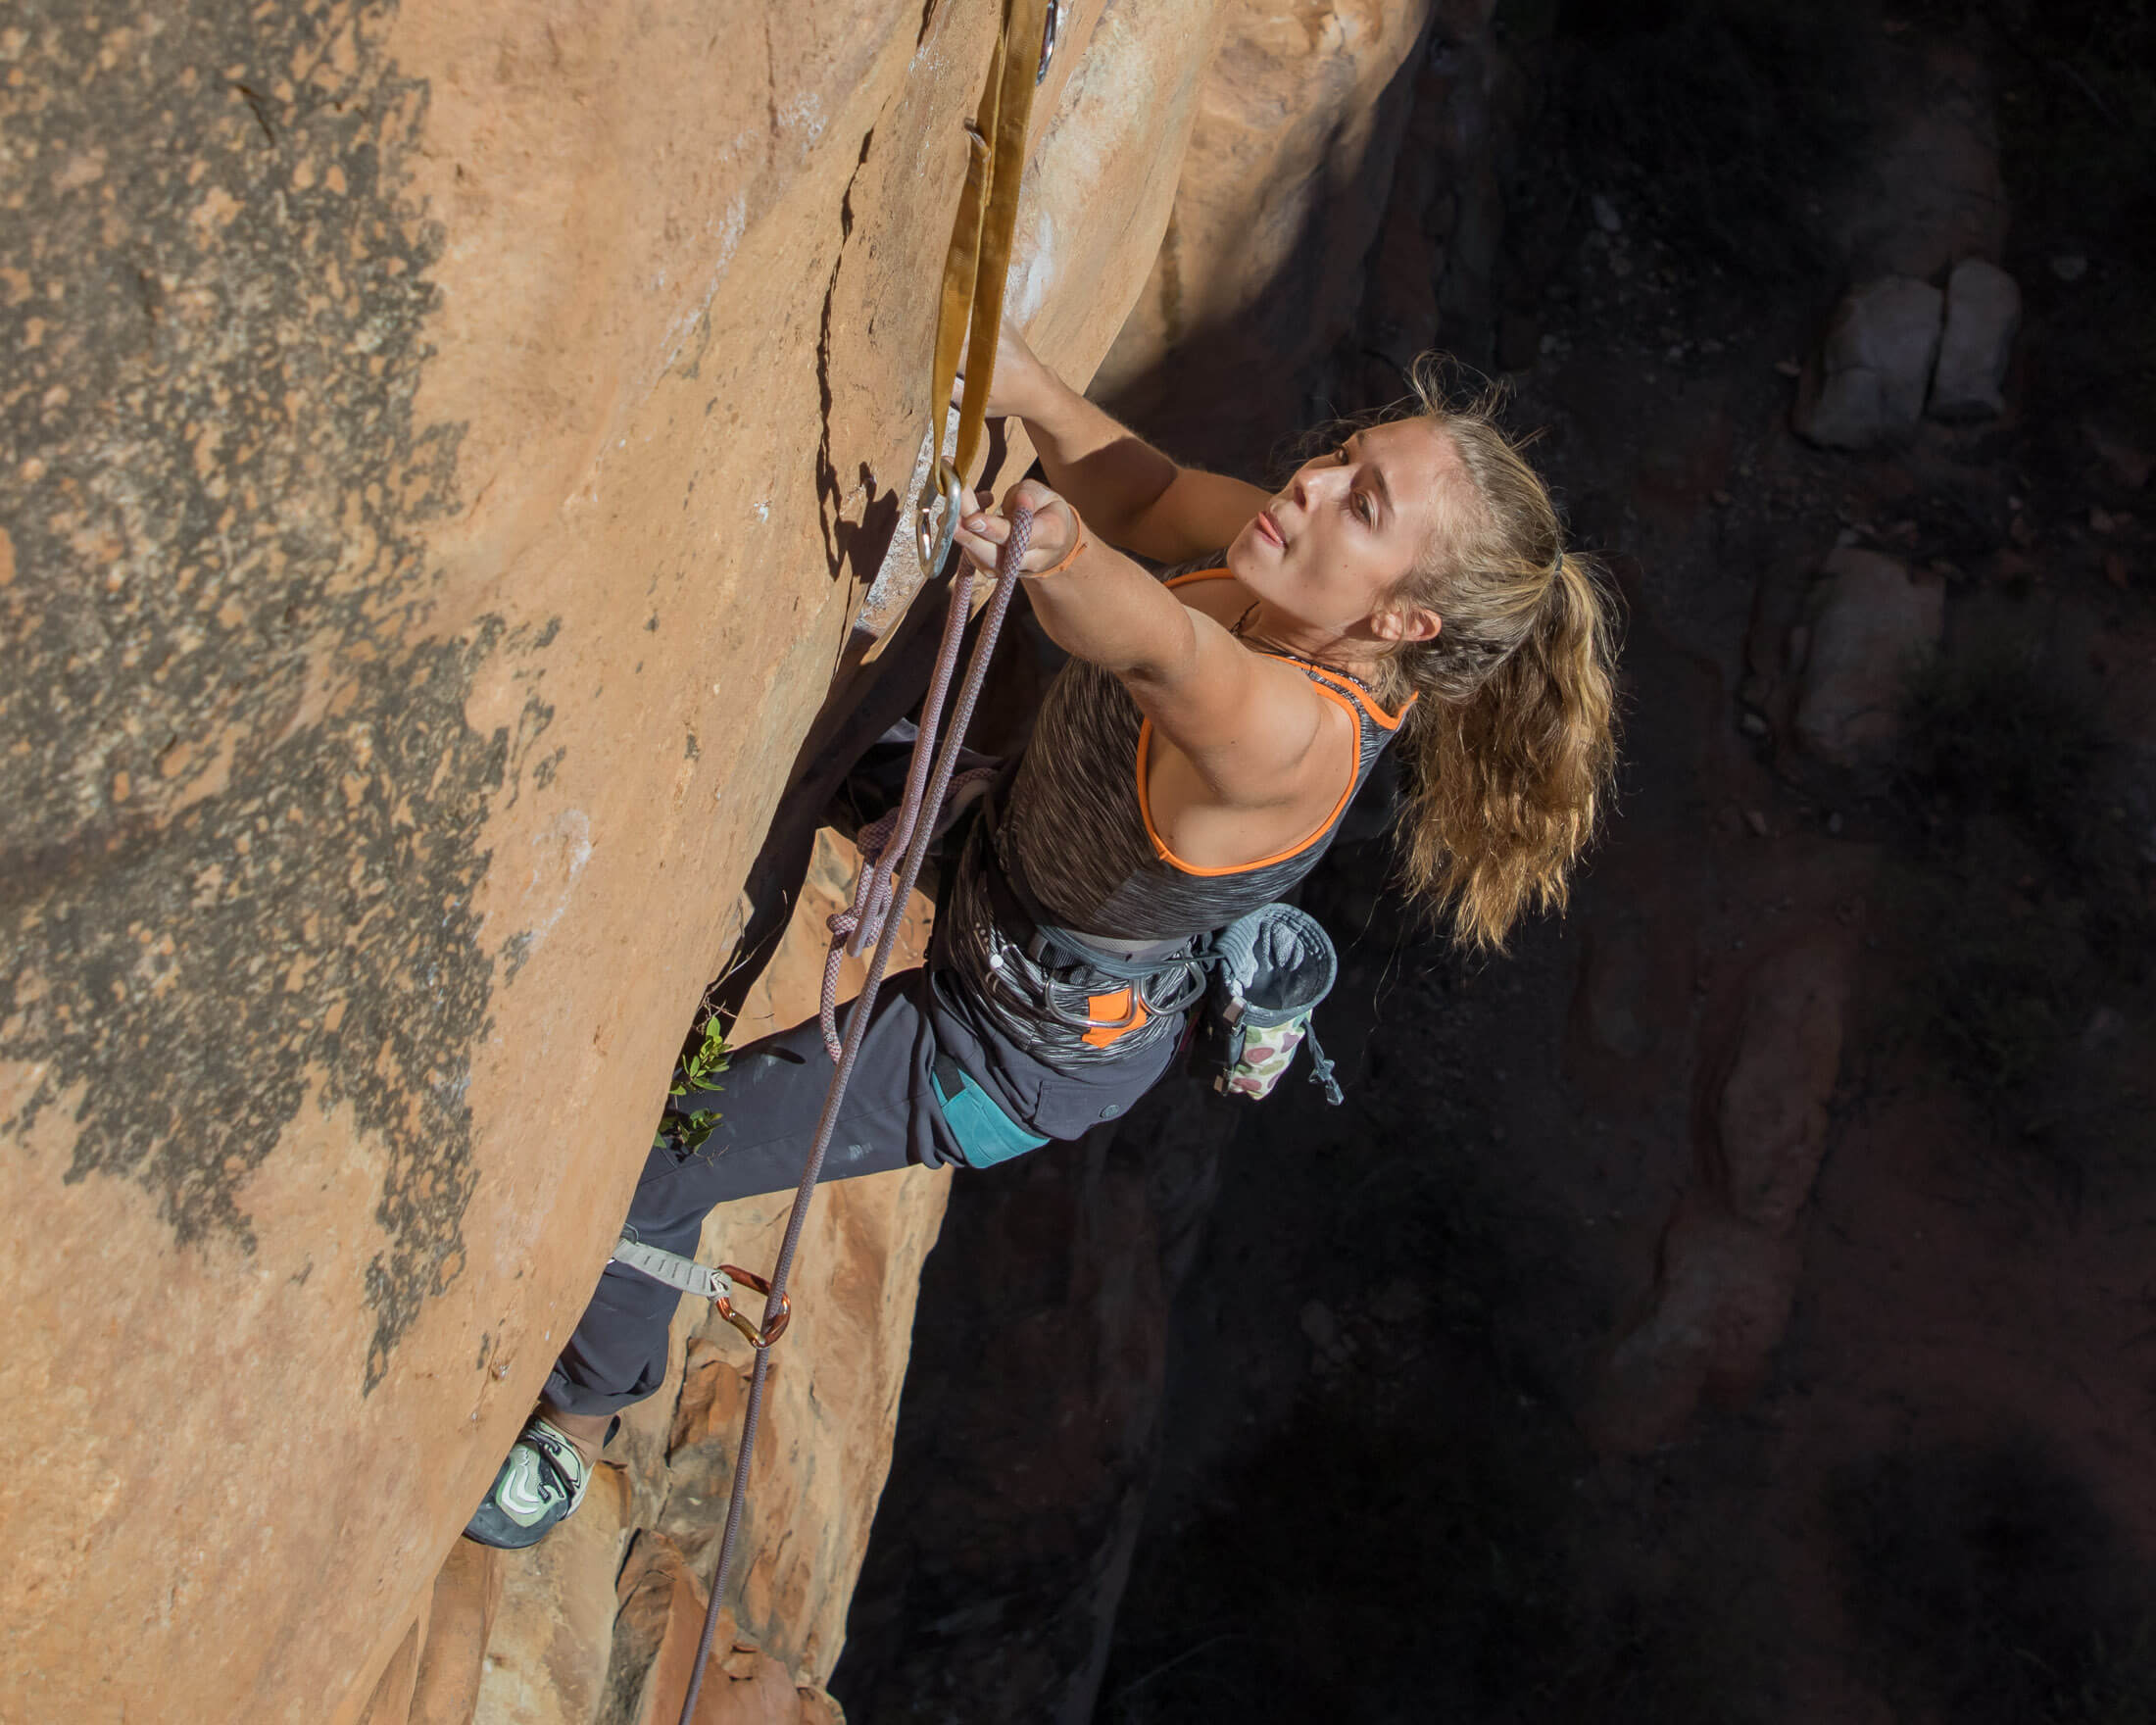 climber clipping a quickdraw on a sport route